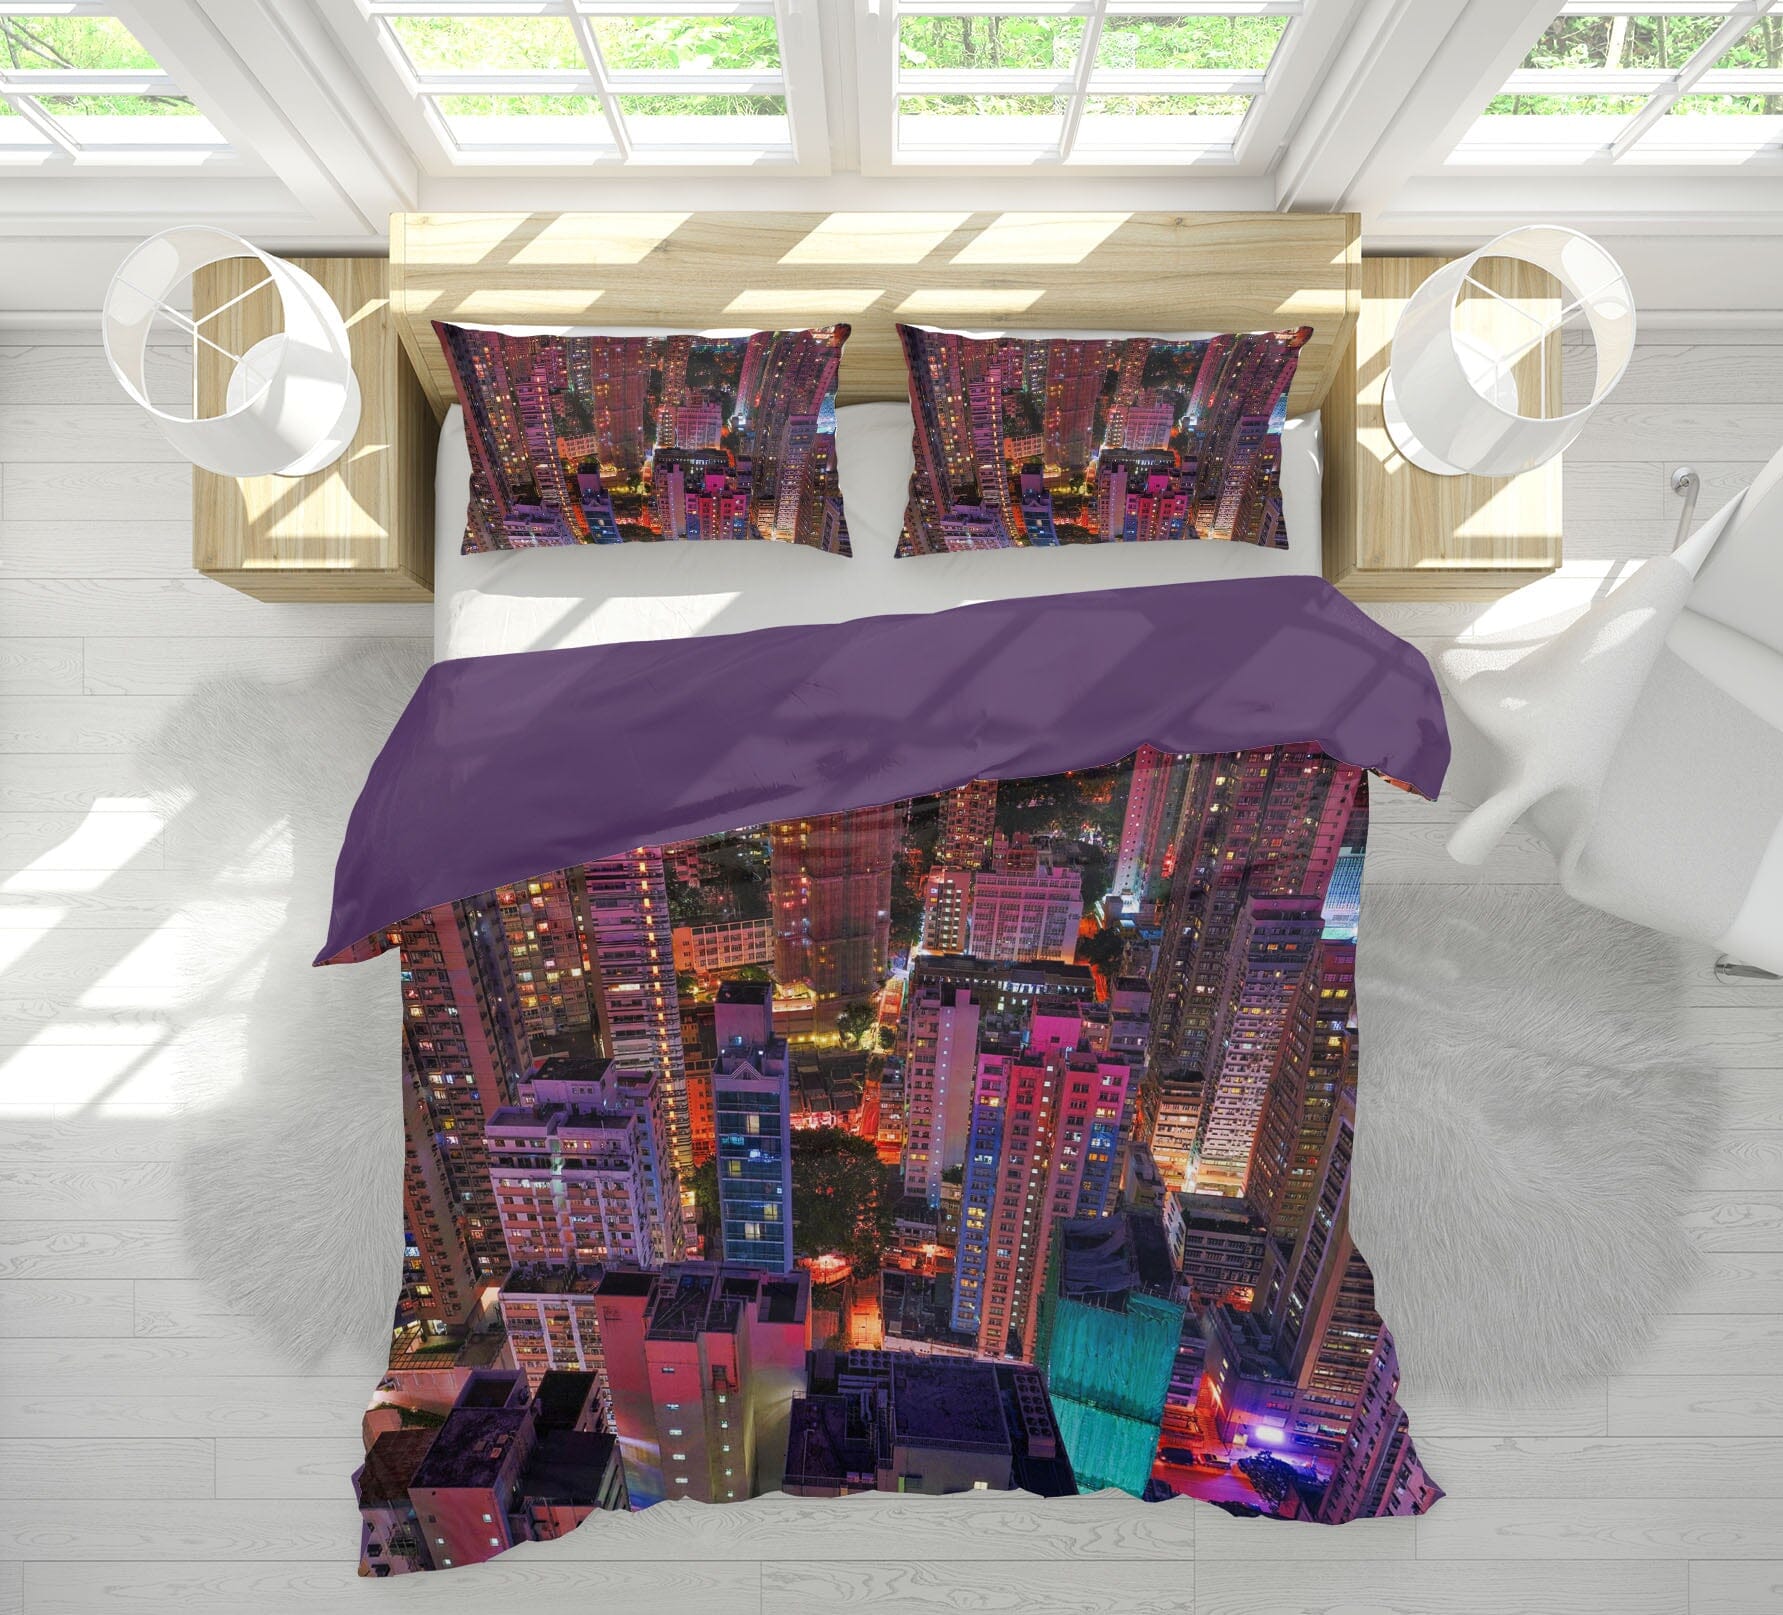 3D Lively City 2129 Marco Carmassi Bedding Bed Pillowcases Quilt Quiet Covers AJ Creativity Home 